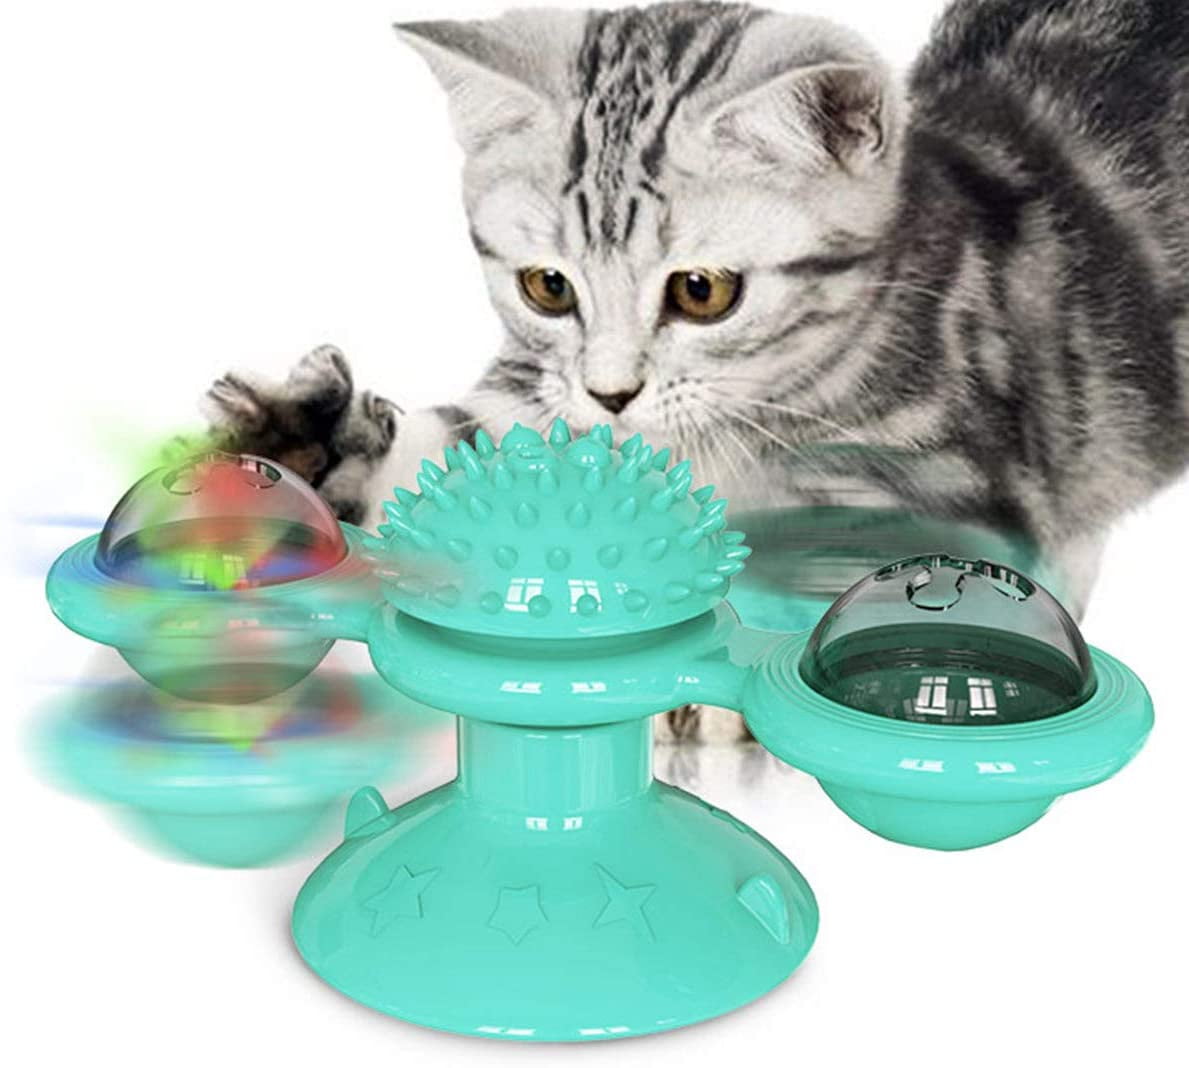 PeSandy Turntable Windmill Cat Toy with Suction Cup Interactive Cat Teasing Toy Multi-functional Cat Toothbrush Toy with Catnips and Bells for Cats/Kitten Scratching Tickle Massage Hair Brush